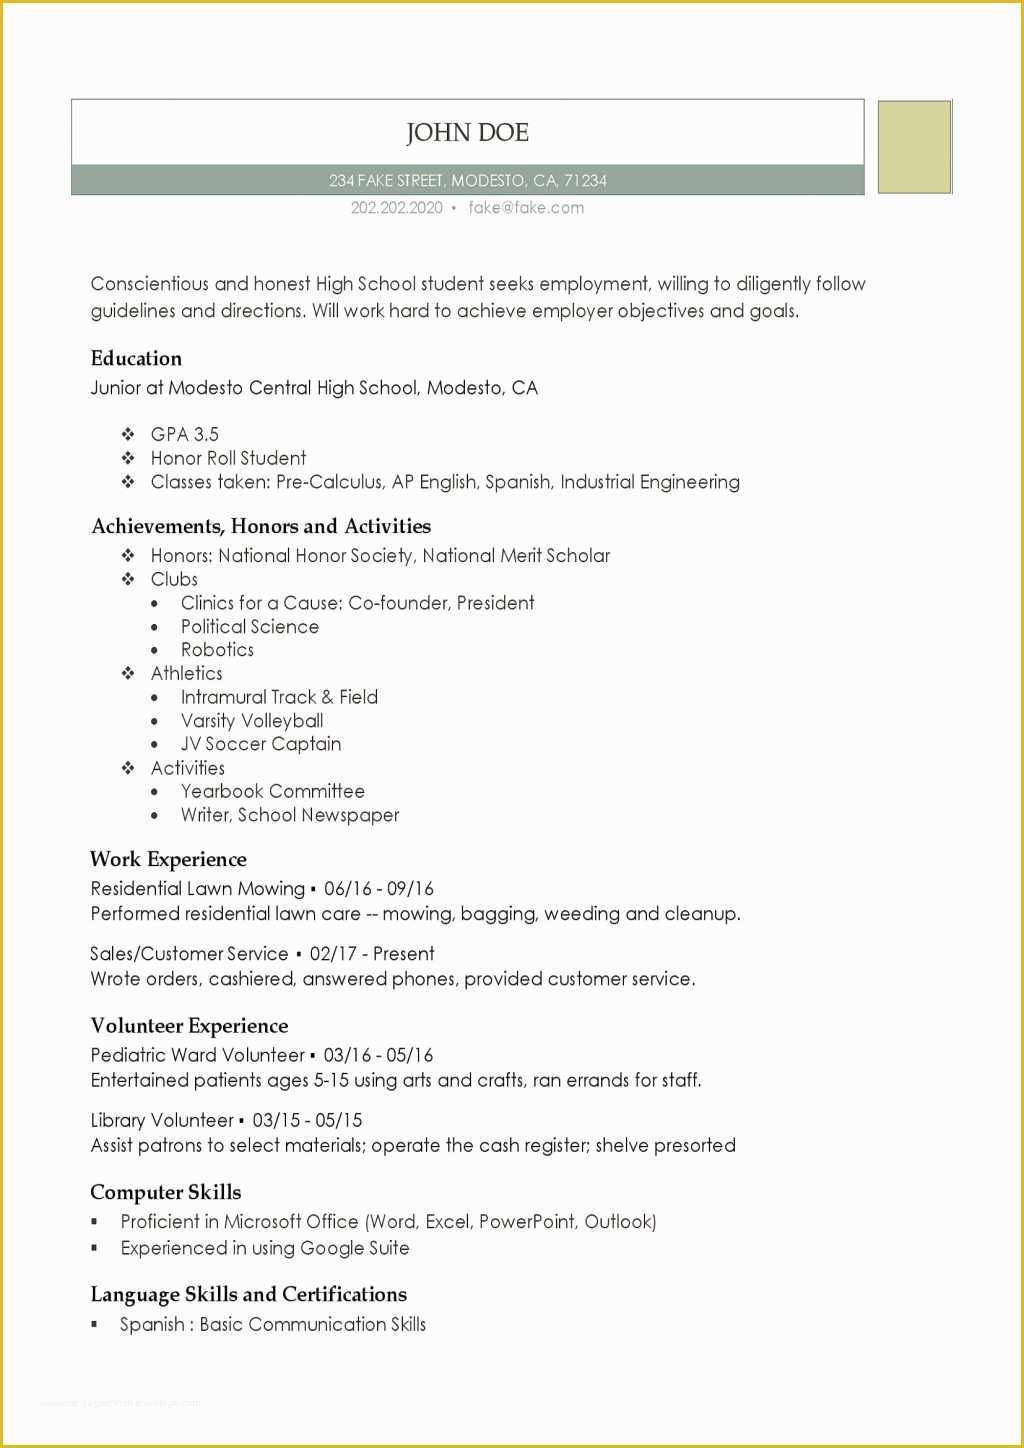 Free Resume Templates for Highschool Students with No Work Experience Of Resume and Template High School Resume Template High